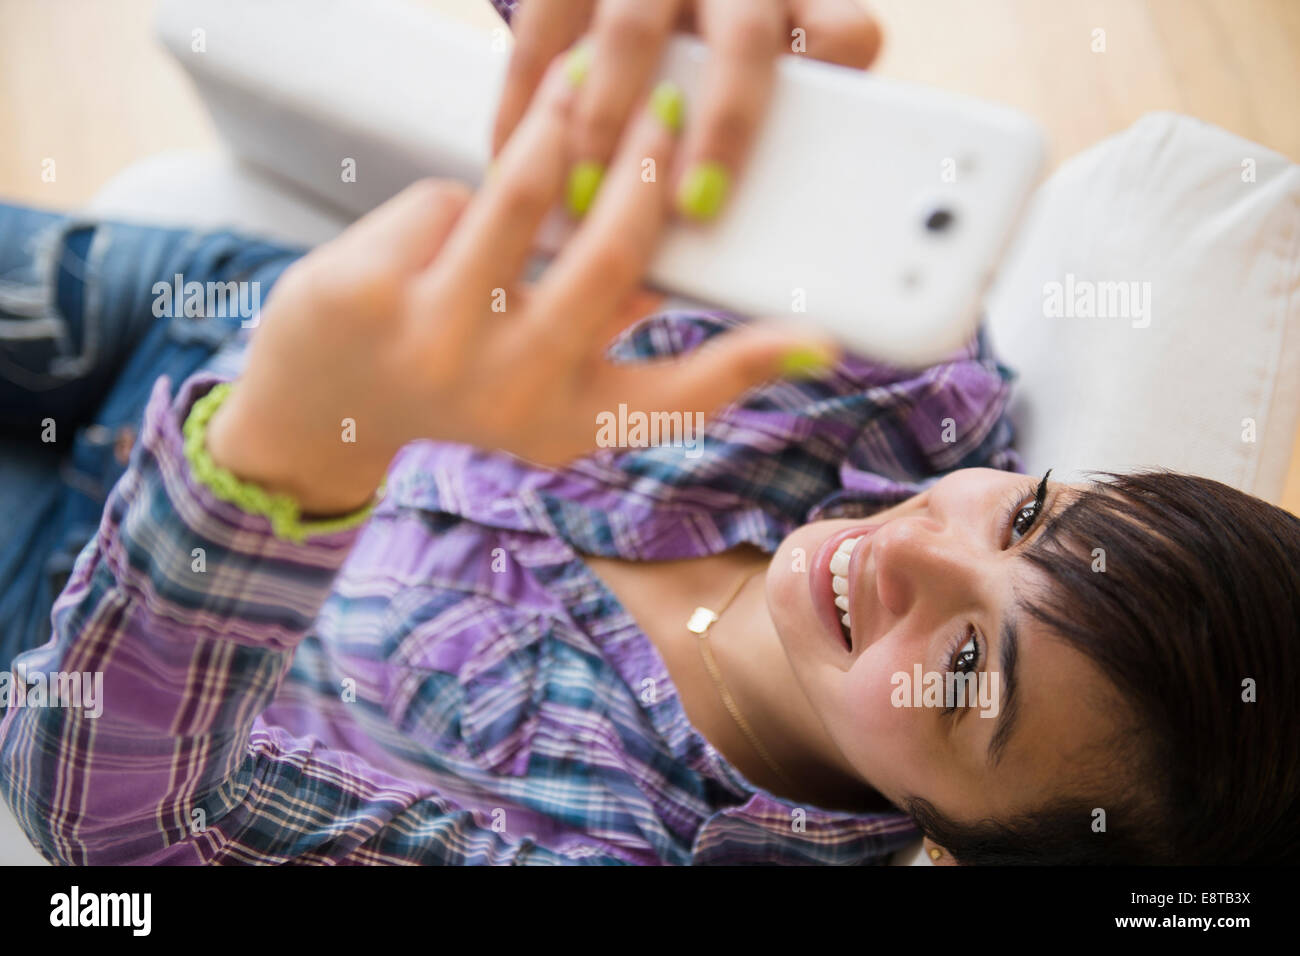 Mixed race woman taking selfie with cell phone Stock Photo